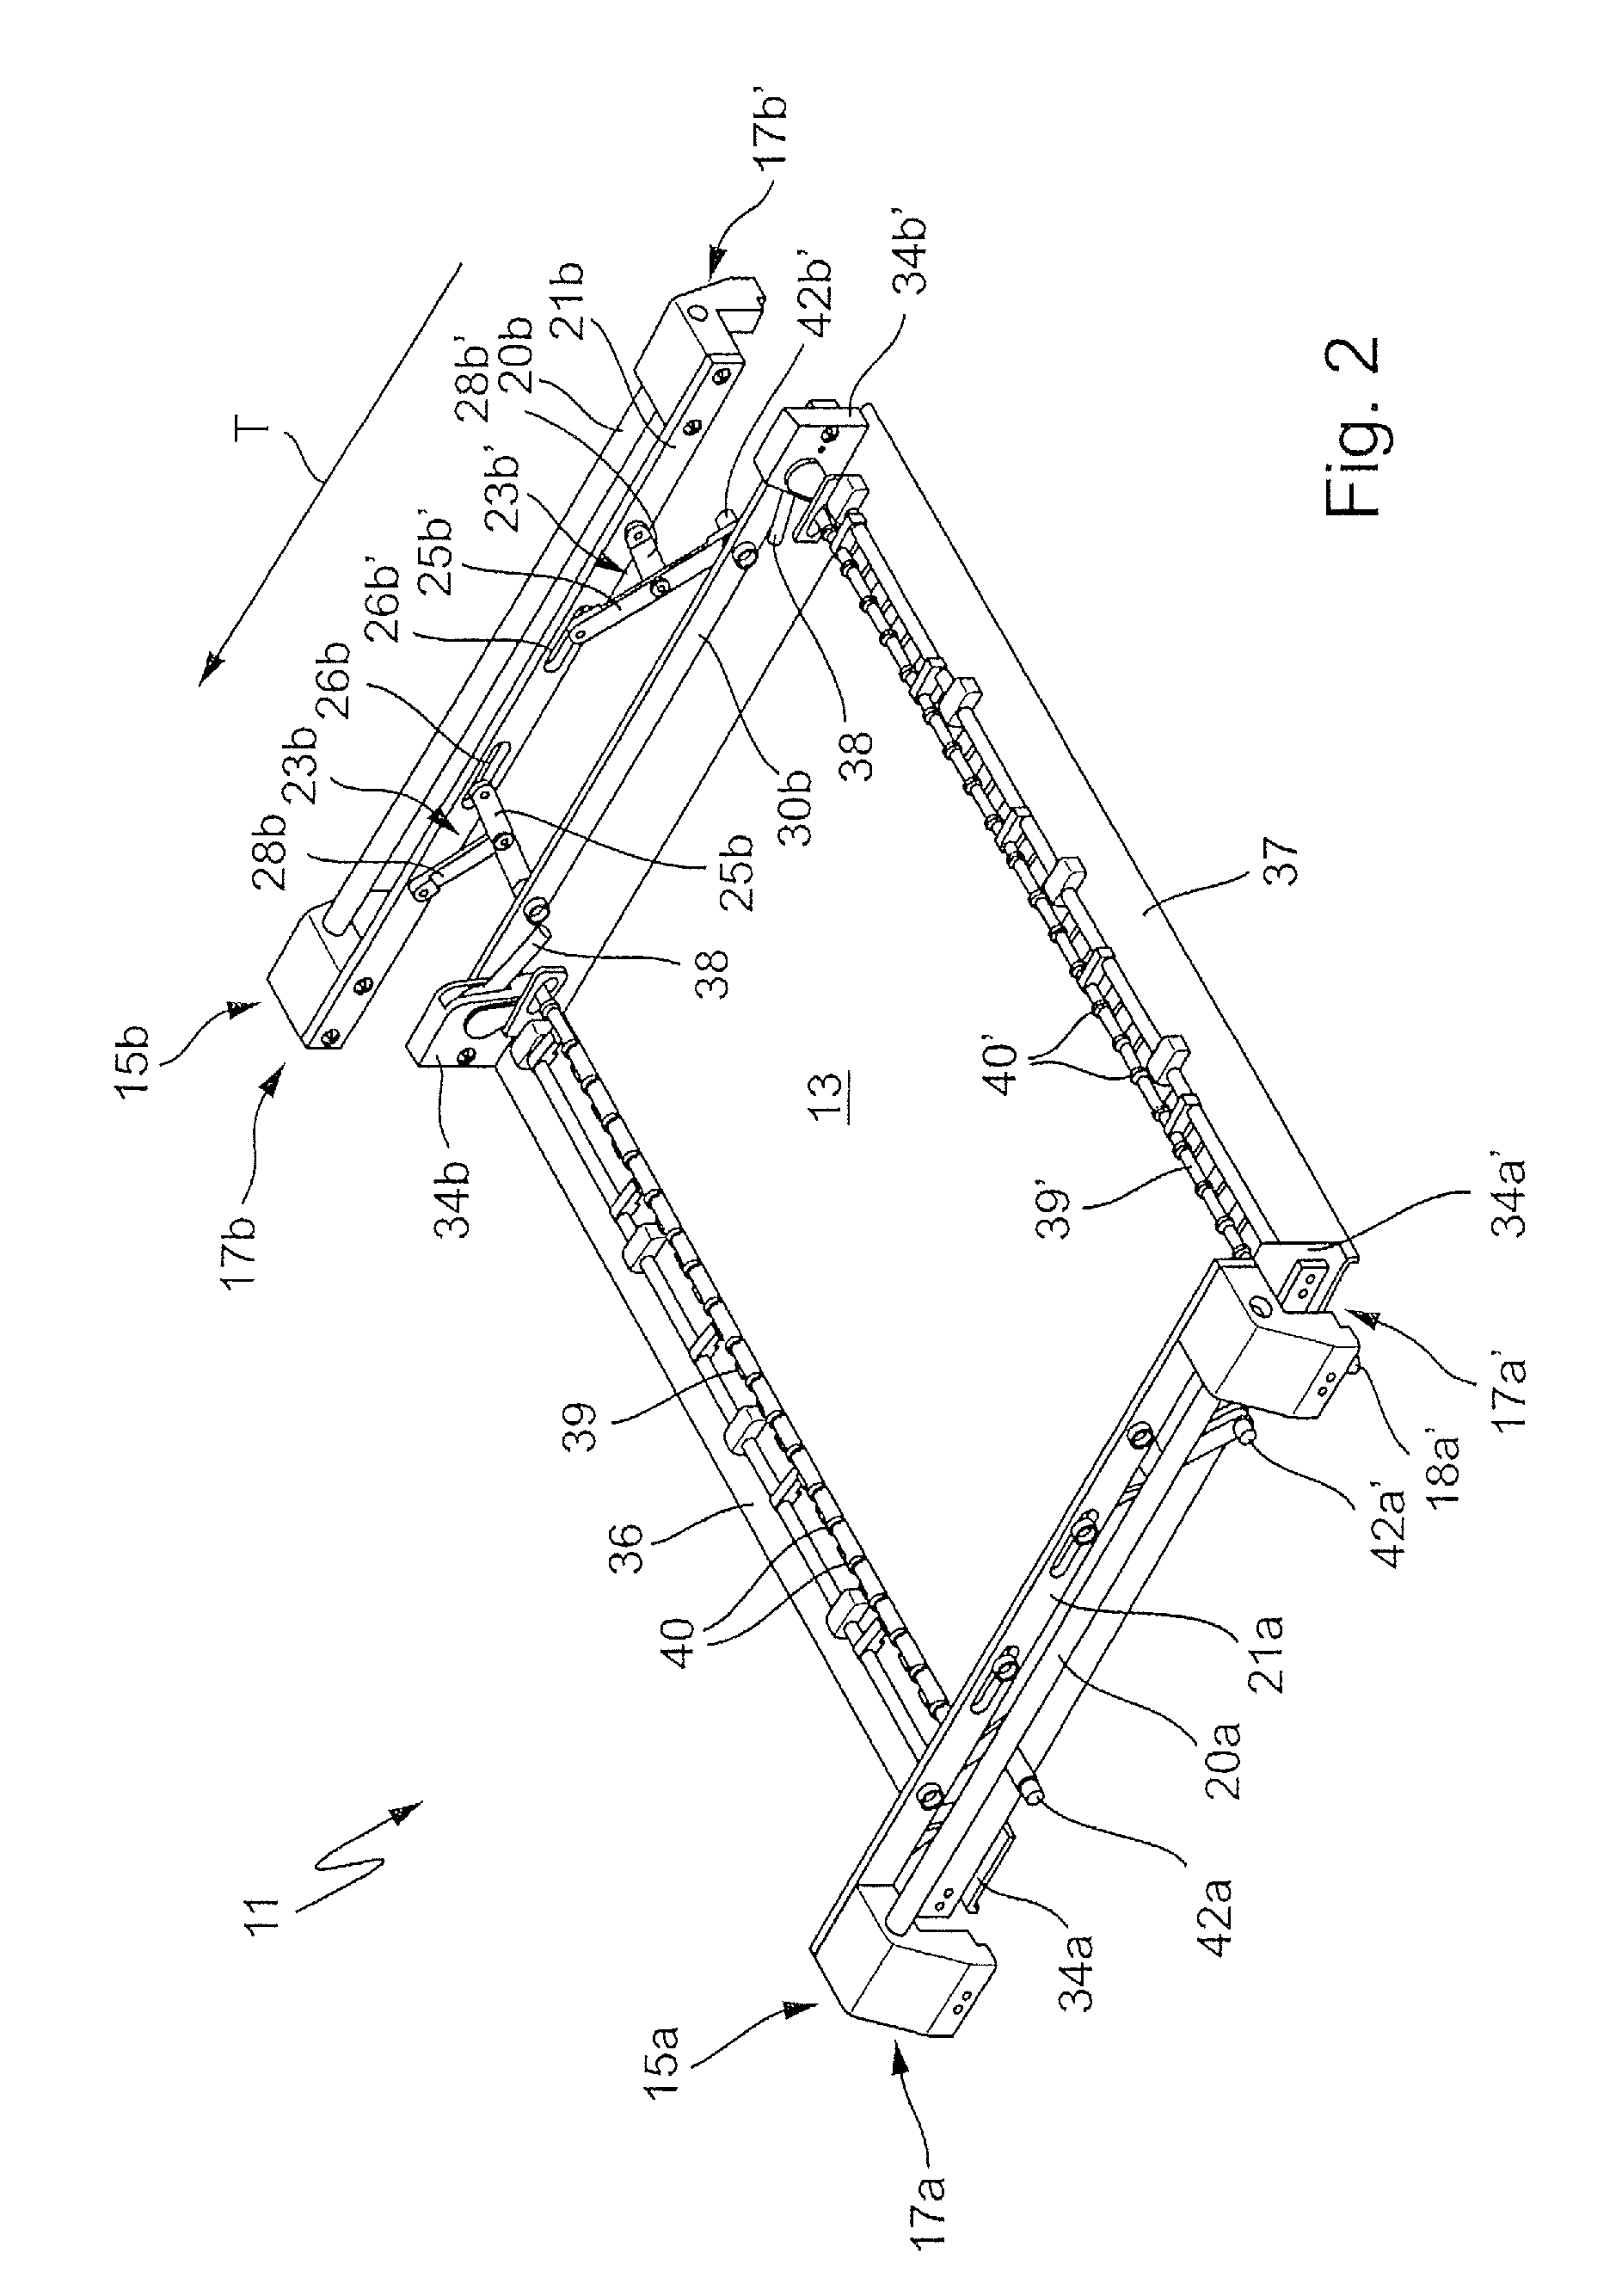 Retaining Device for Thin, Planar Substrates